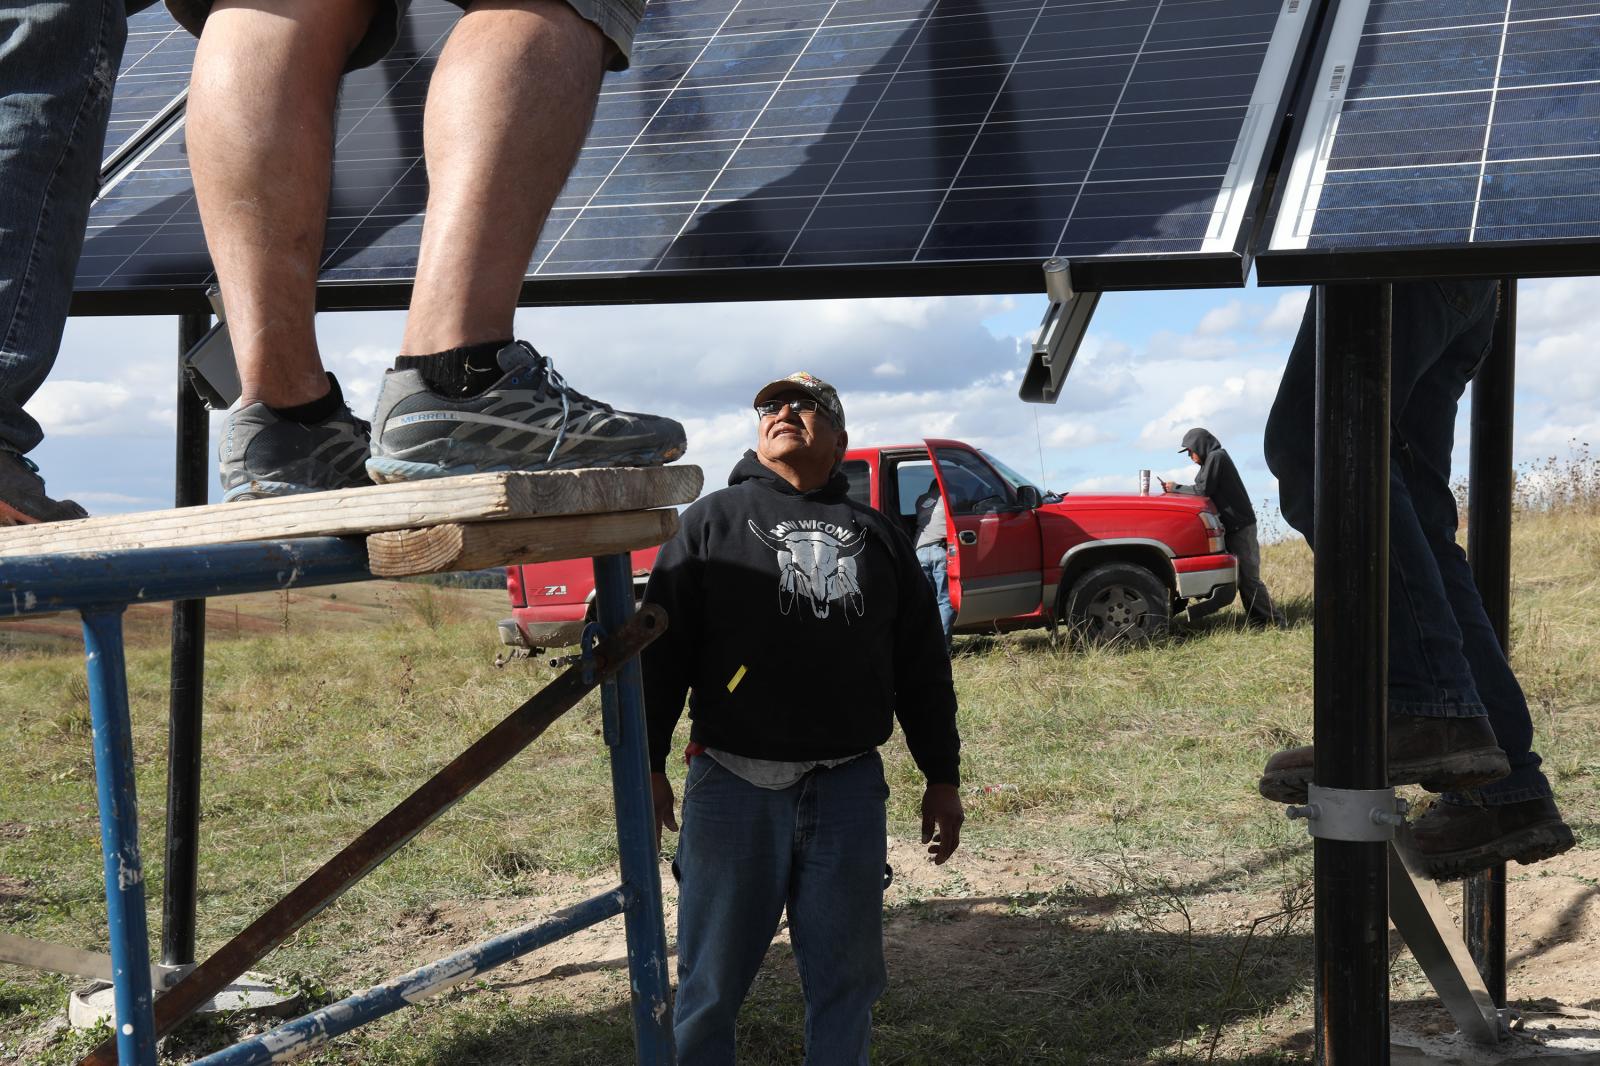 Ivan Looking Horse helps to install solar panels on the Pine Ridge reservation in South Dakota, U.S., Sept. 25, 2018. Picture taken Sept. 25, 2018. REUTERS/Emilie Richardson